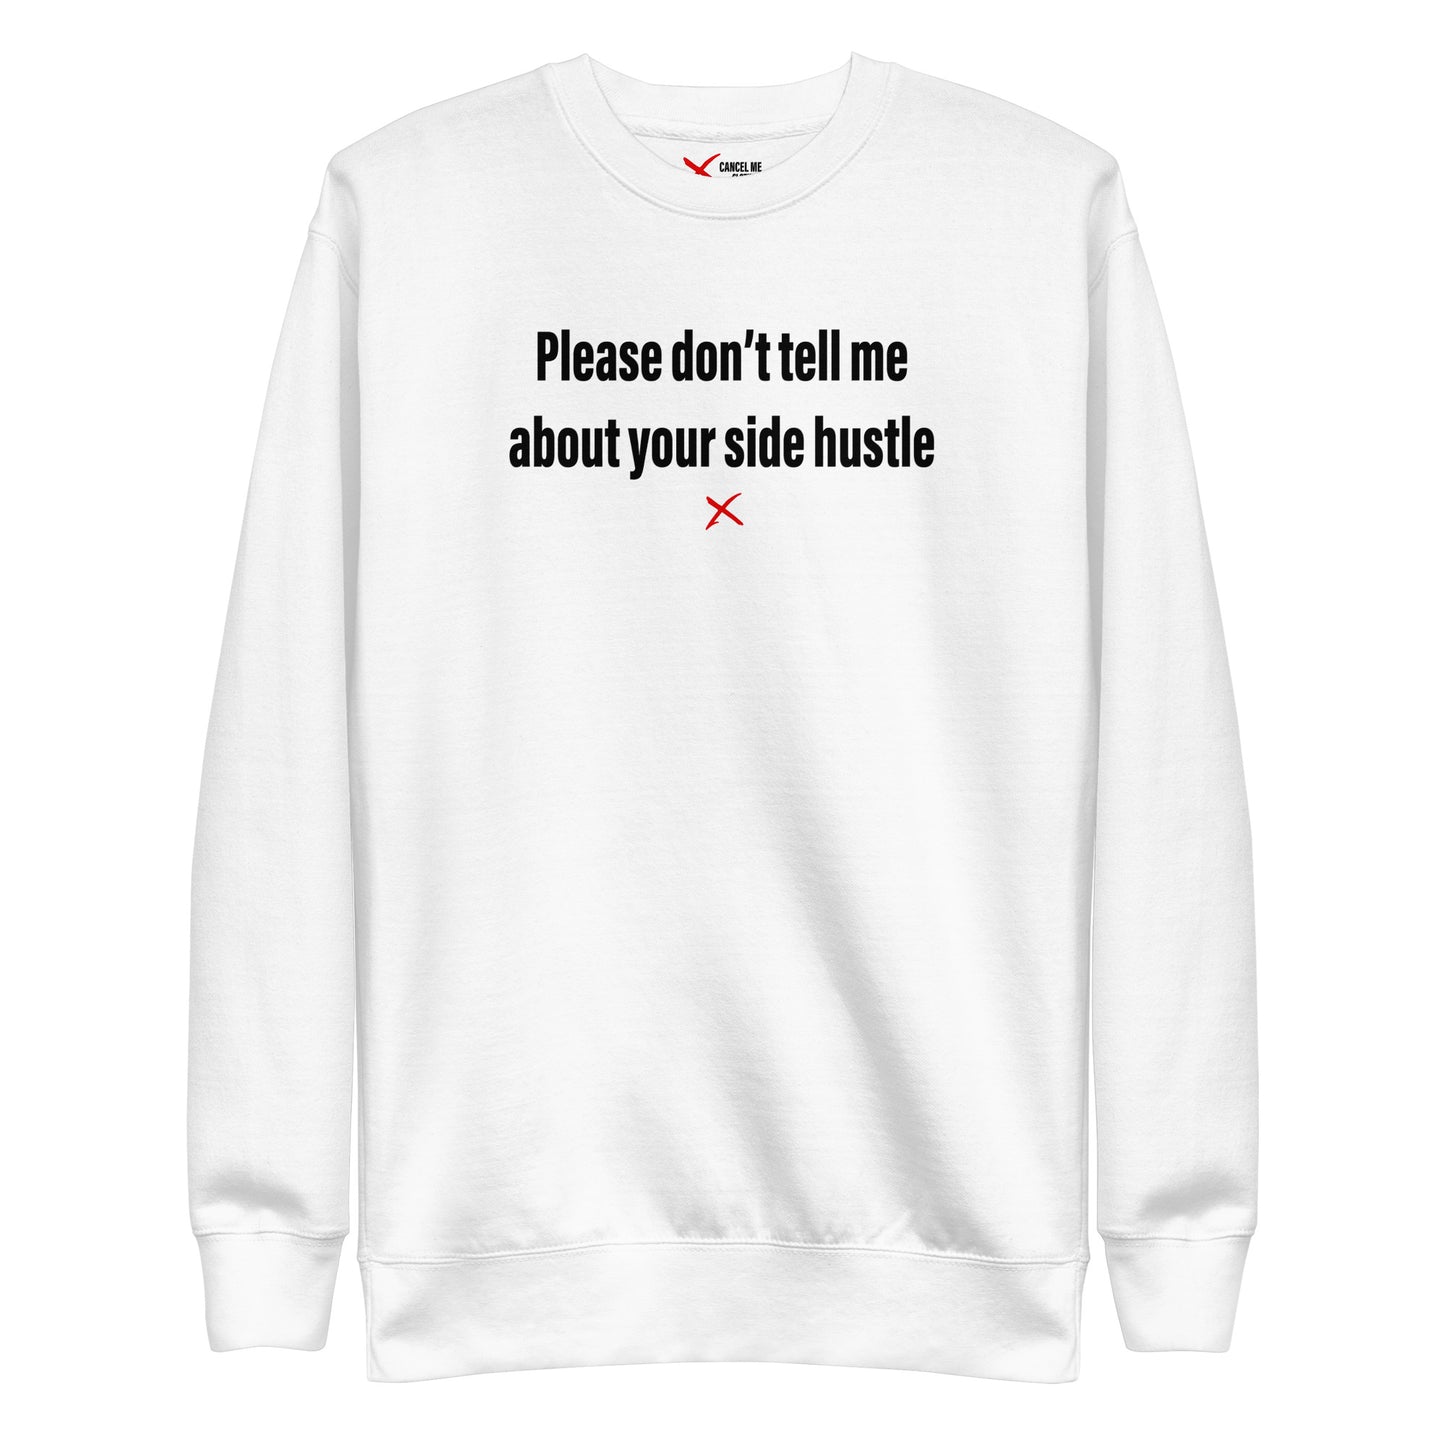 Please don't tell me about your side hustle - Sweatshirt